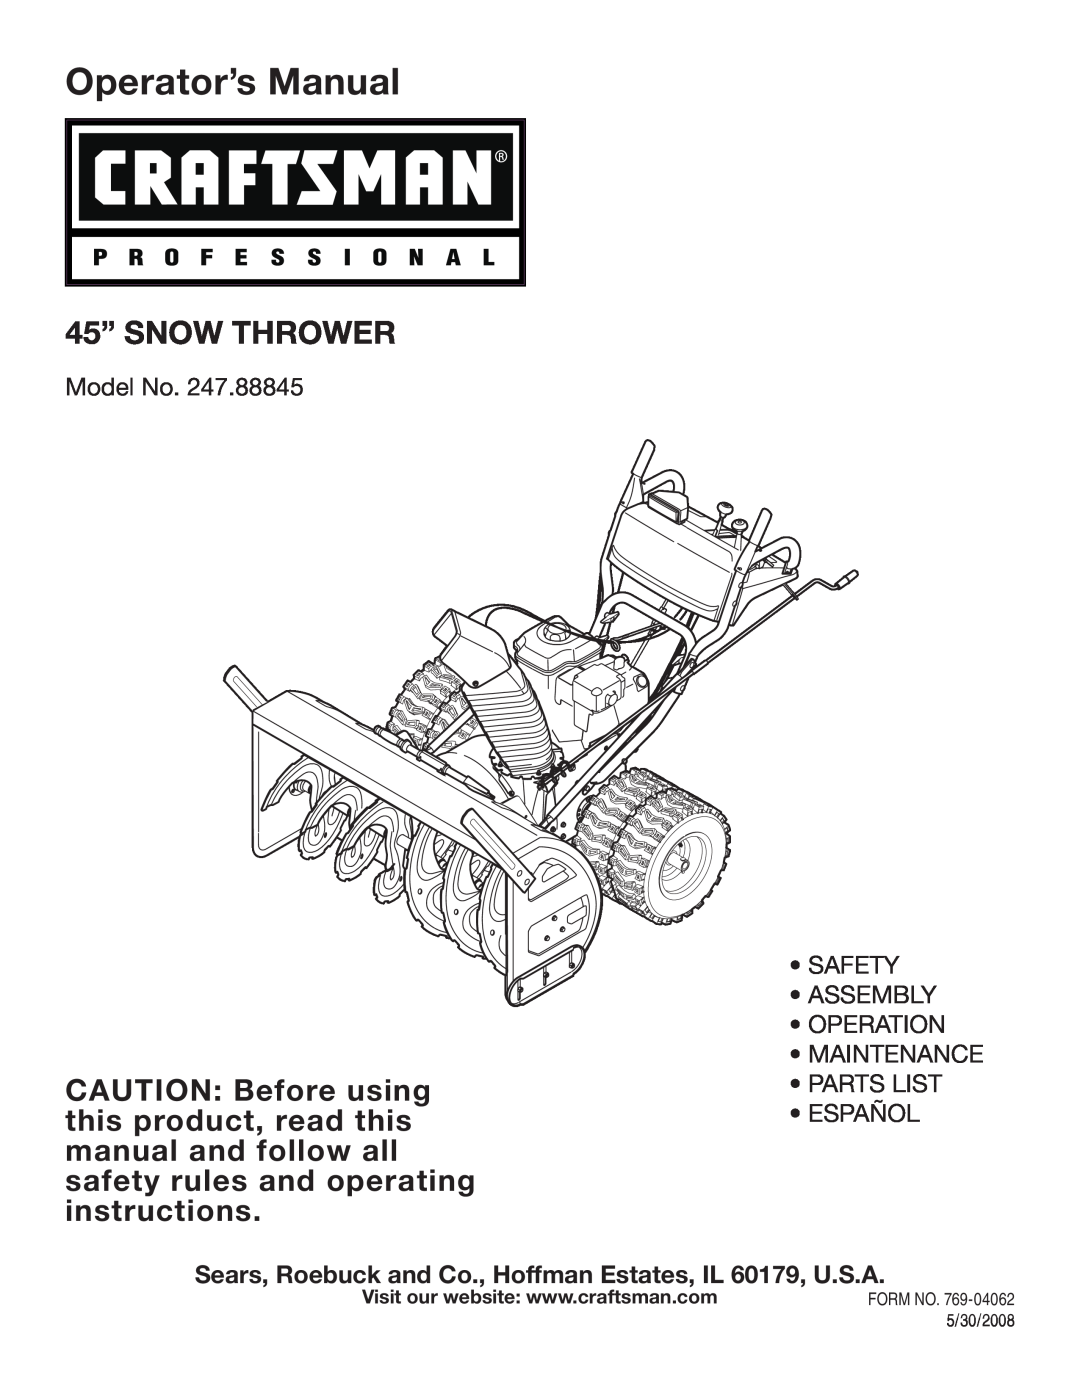 Craftsman 247.88845 manual Sears, Roebuck and Co., Hoffman Estates, IL 60179, U.S.A, Operator’s Manual, 45” SNOW THROWER 